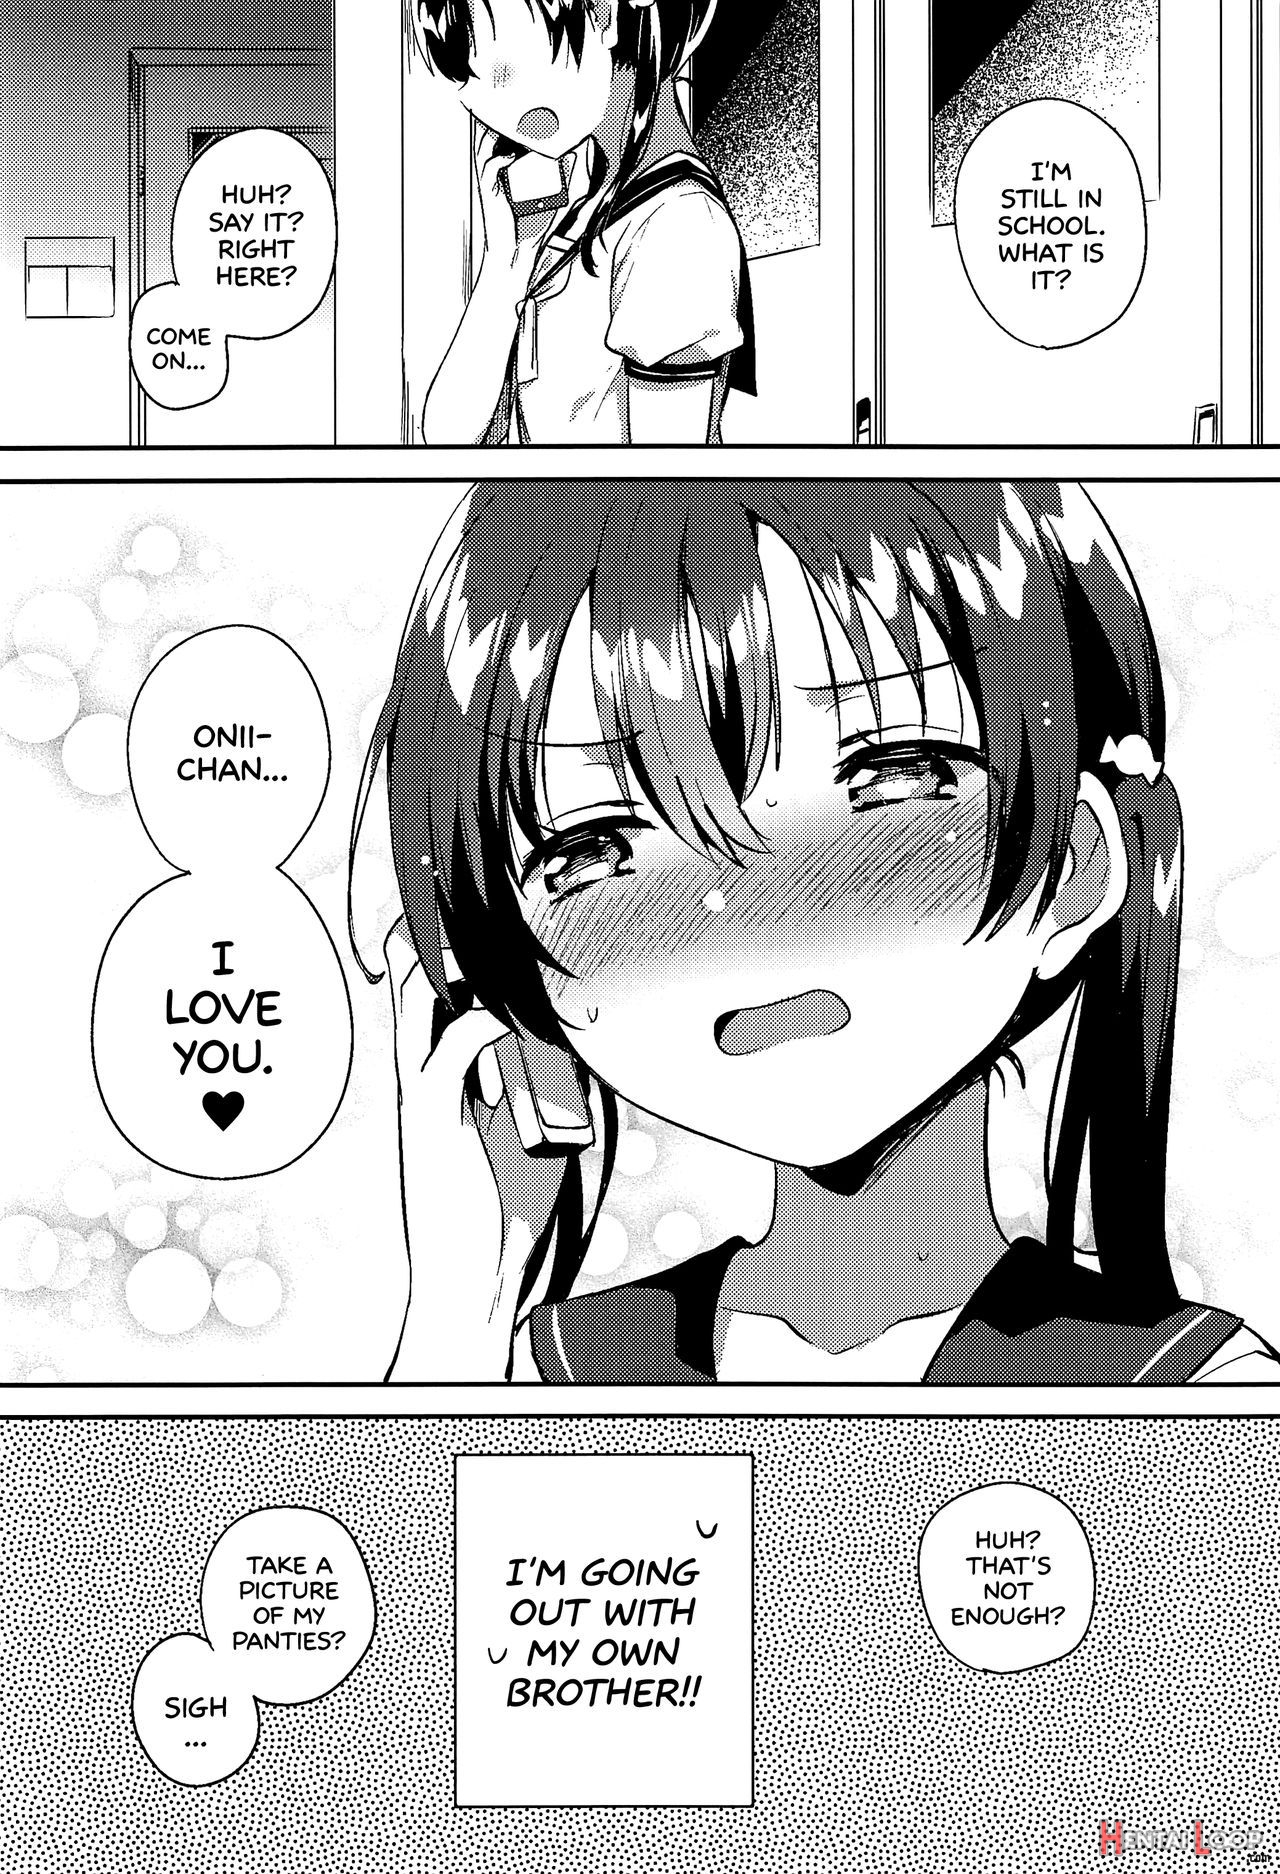 Page 10 of Having Sex With Your Little Sister? Thats Gross! (by Ichihaya) 